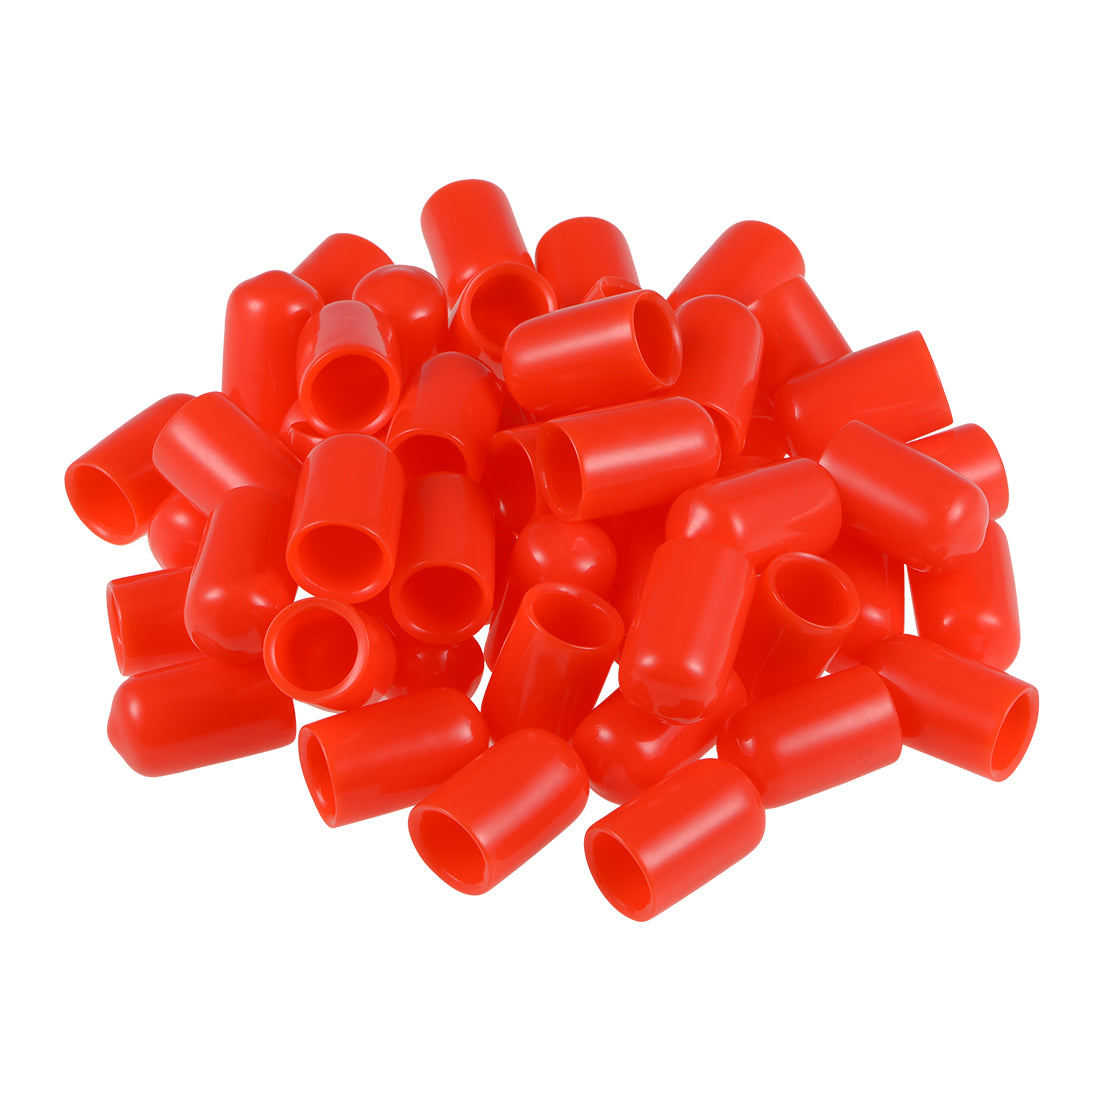 uxcell Uxcell 80pcs Rubber End Caps 10mm ID 20mm Height Screw Thread Protectors Red